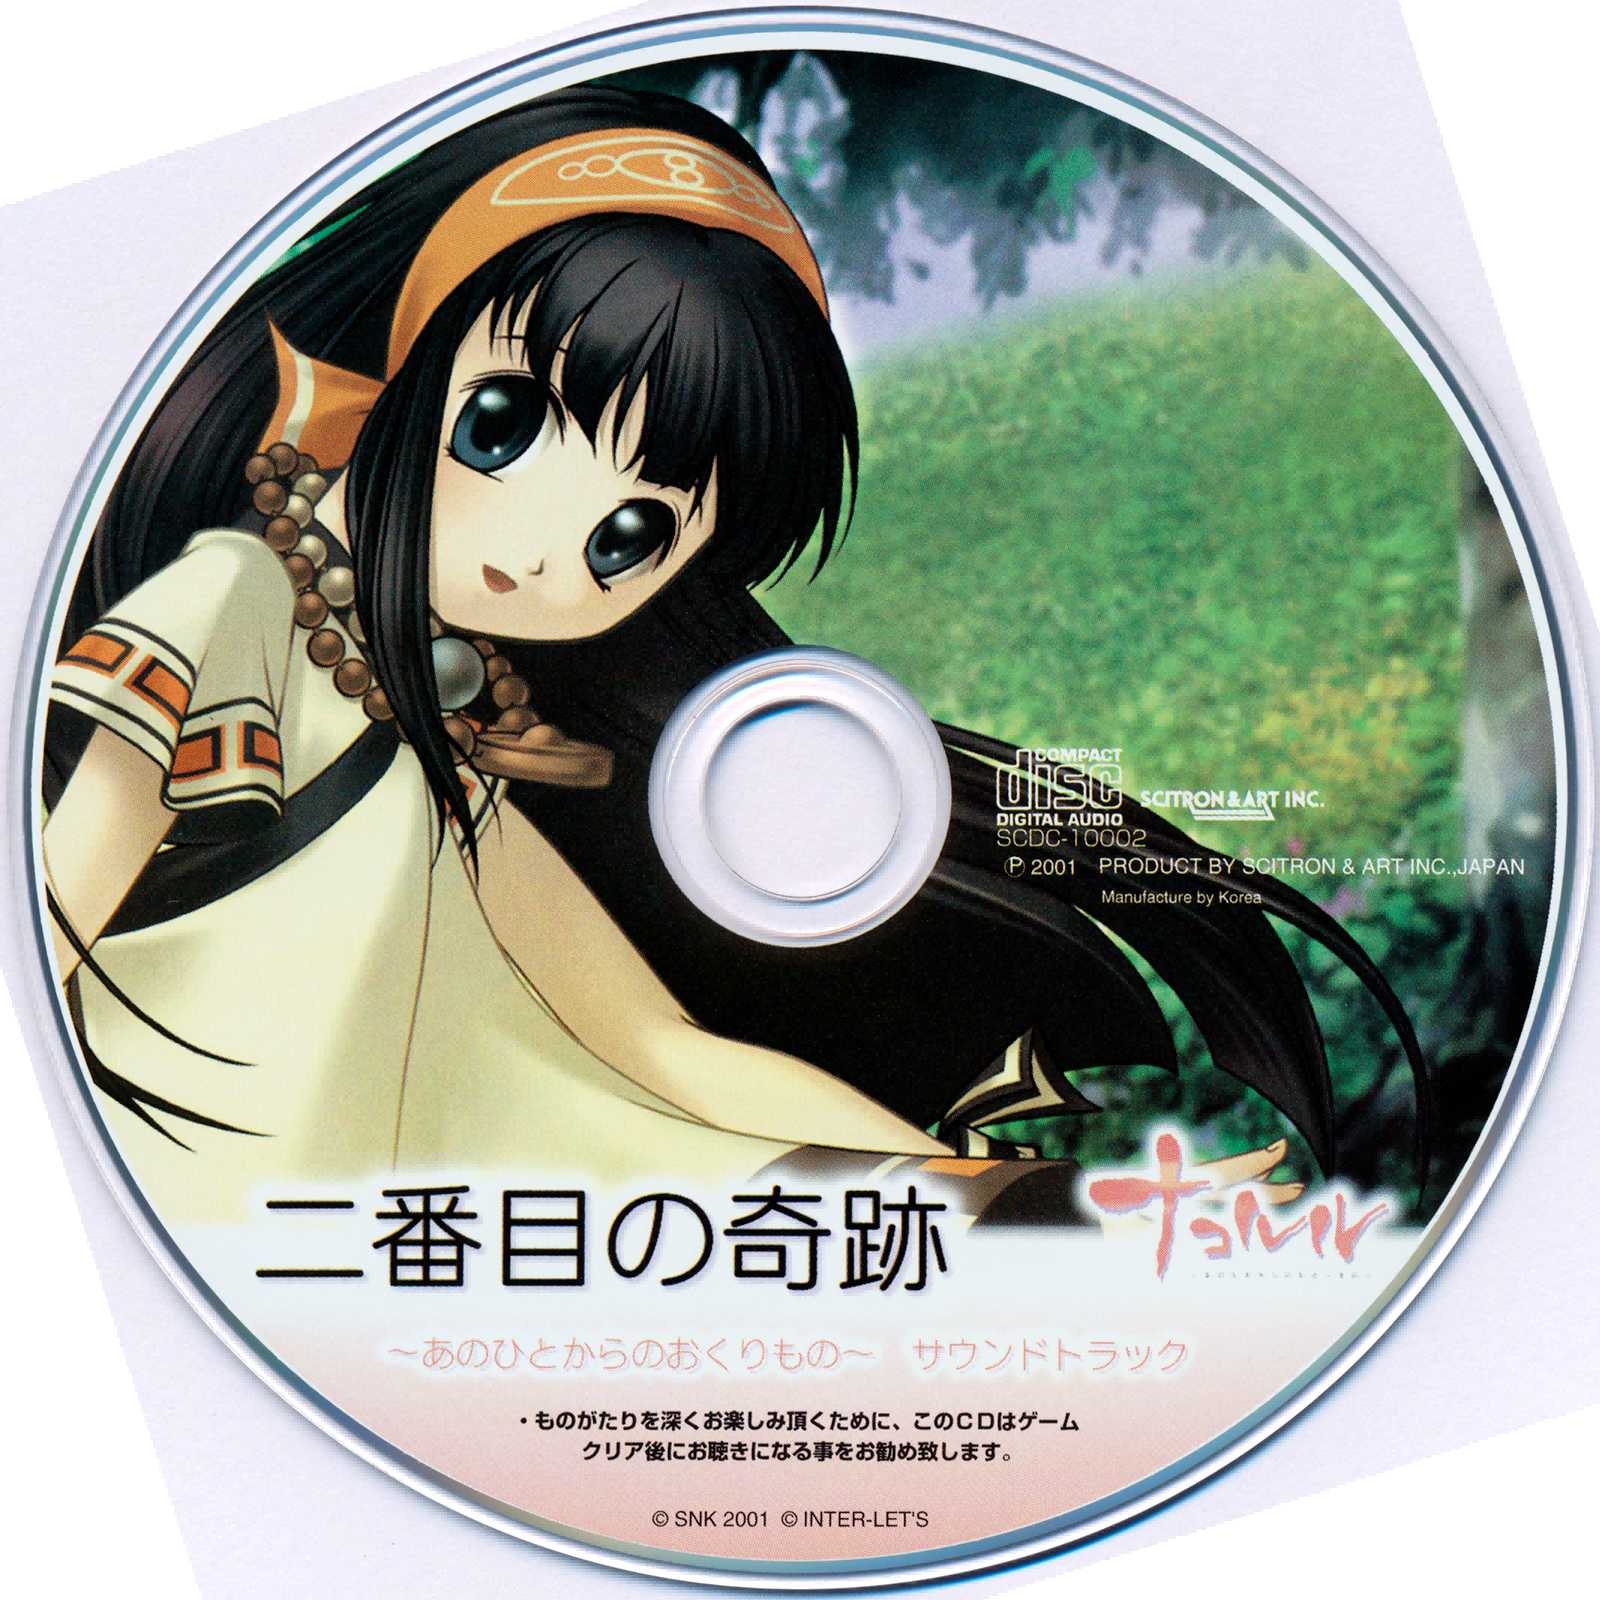 scdc-10002-disc.png